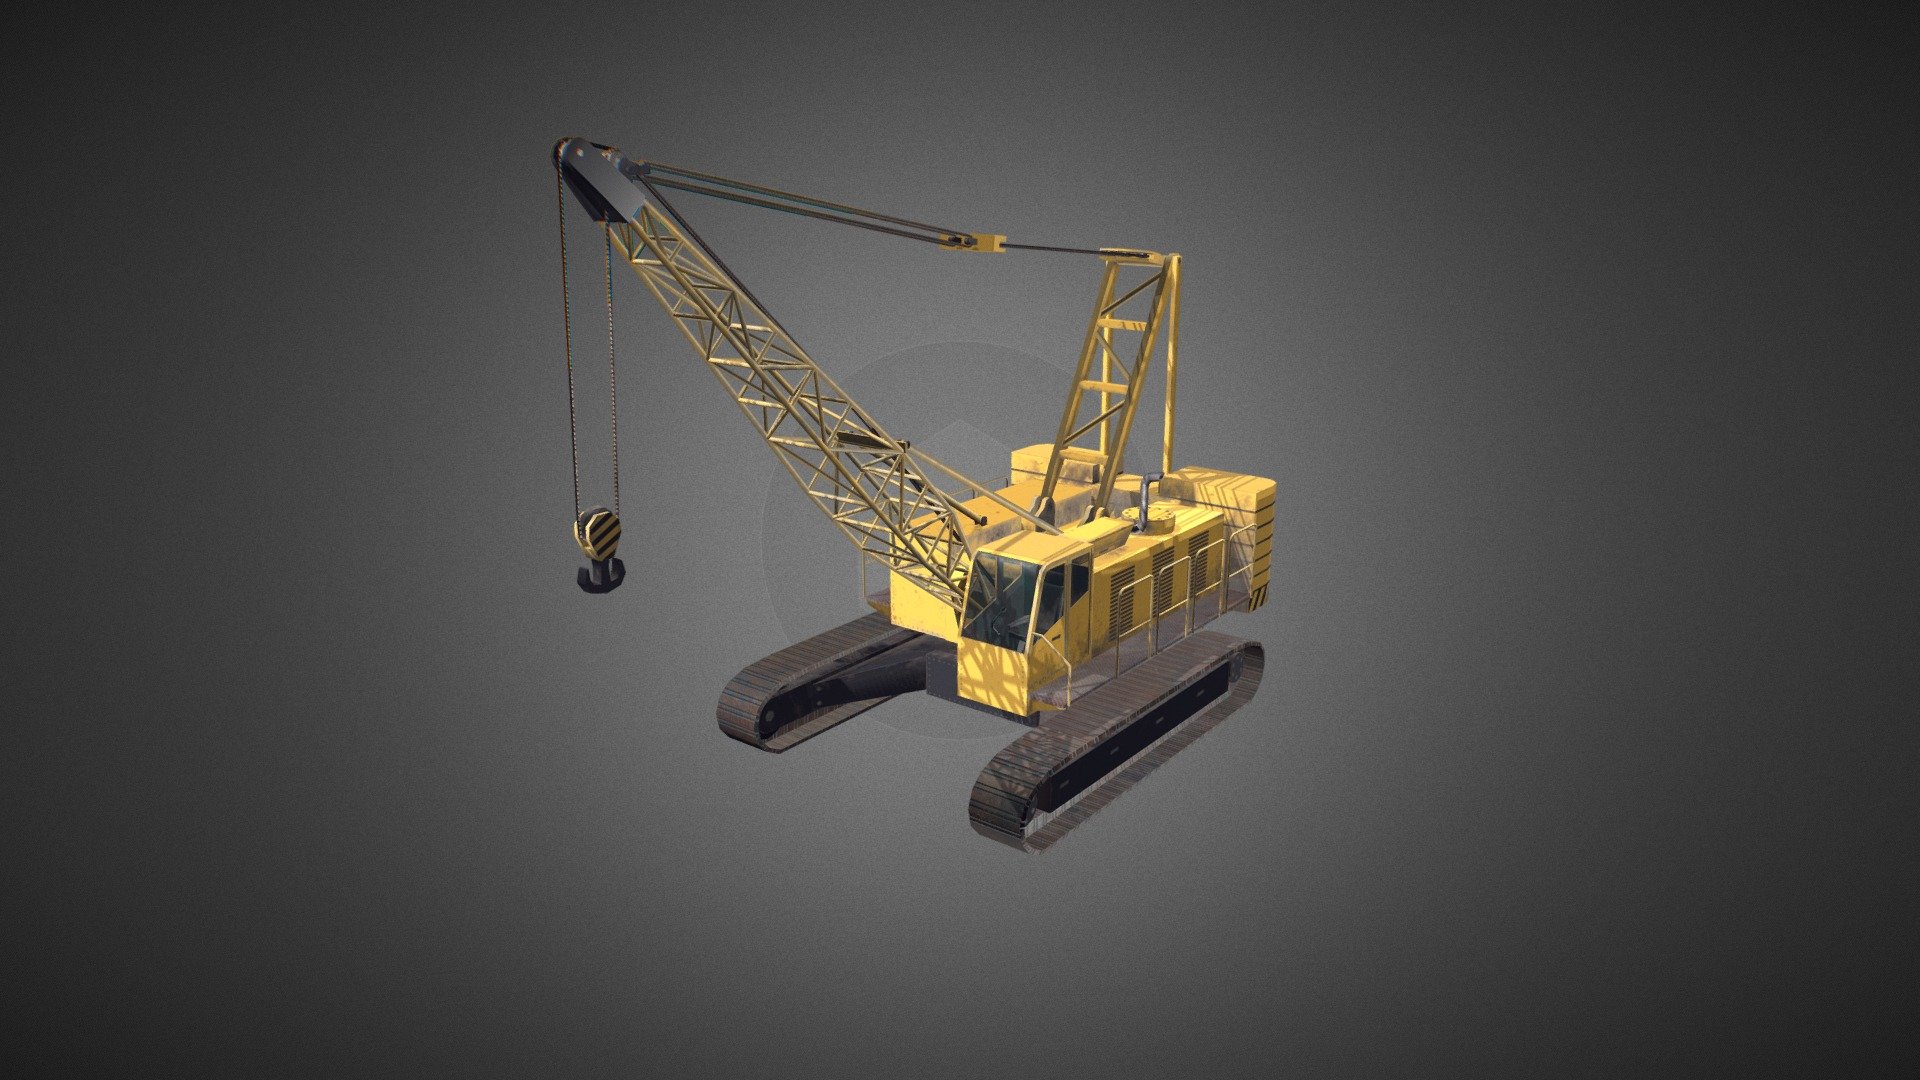 Low poly game-ready 3d model of a Crawler crane 02 for Virtual Reality (VR), Augmented Reality (AR), games and other real-time apps - Crawler crane 02 - Buy Royalty Free 3D model by CG Duck (@cg_duck) 3d model